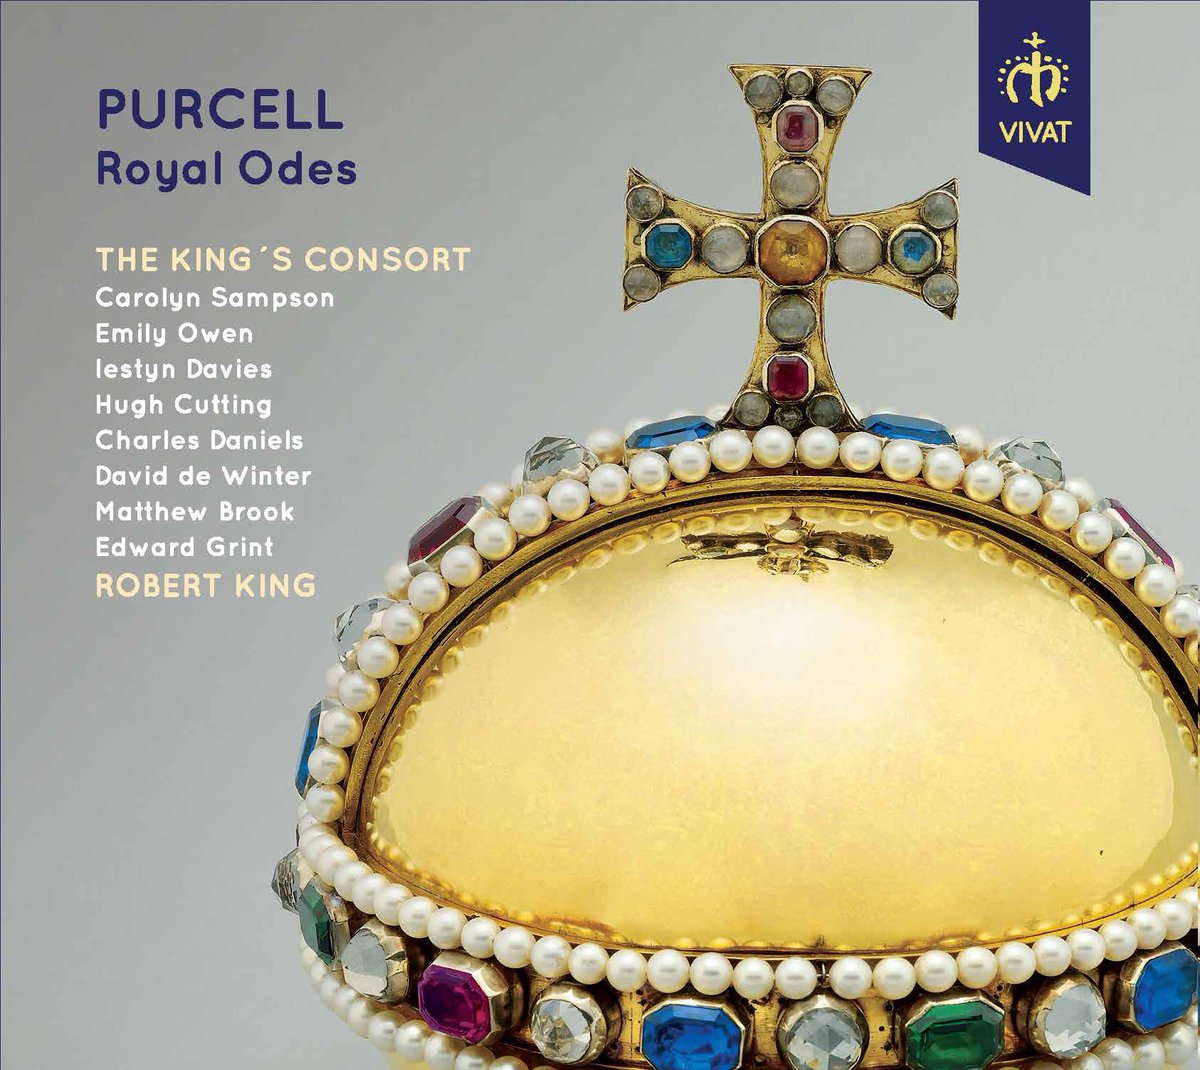 Out next week! Purcell Odes from The King’s Consort and a bunch of lovely soloists... Here’s an introductory video: youtu.be/qzJnaT0s5Qg Album available here: vivatmusic.com